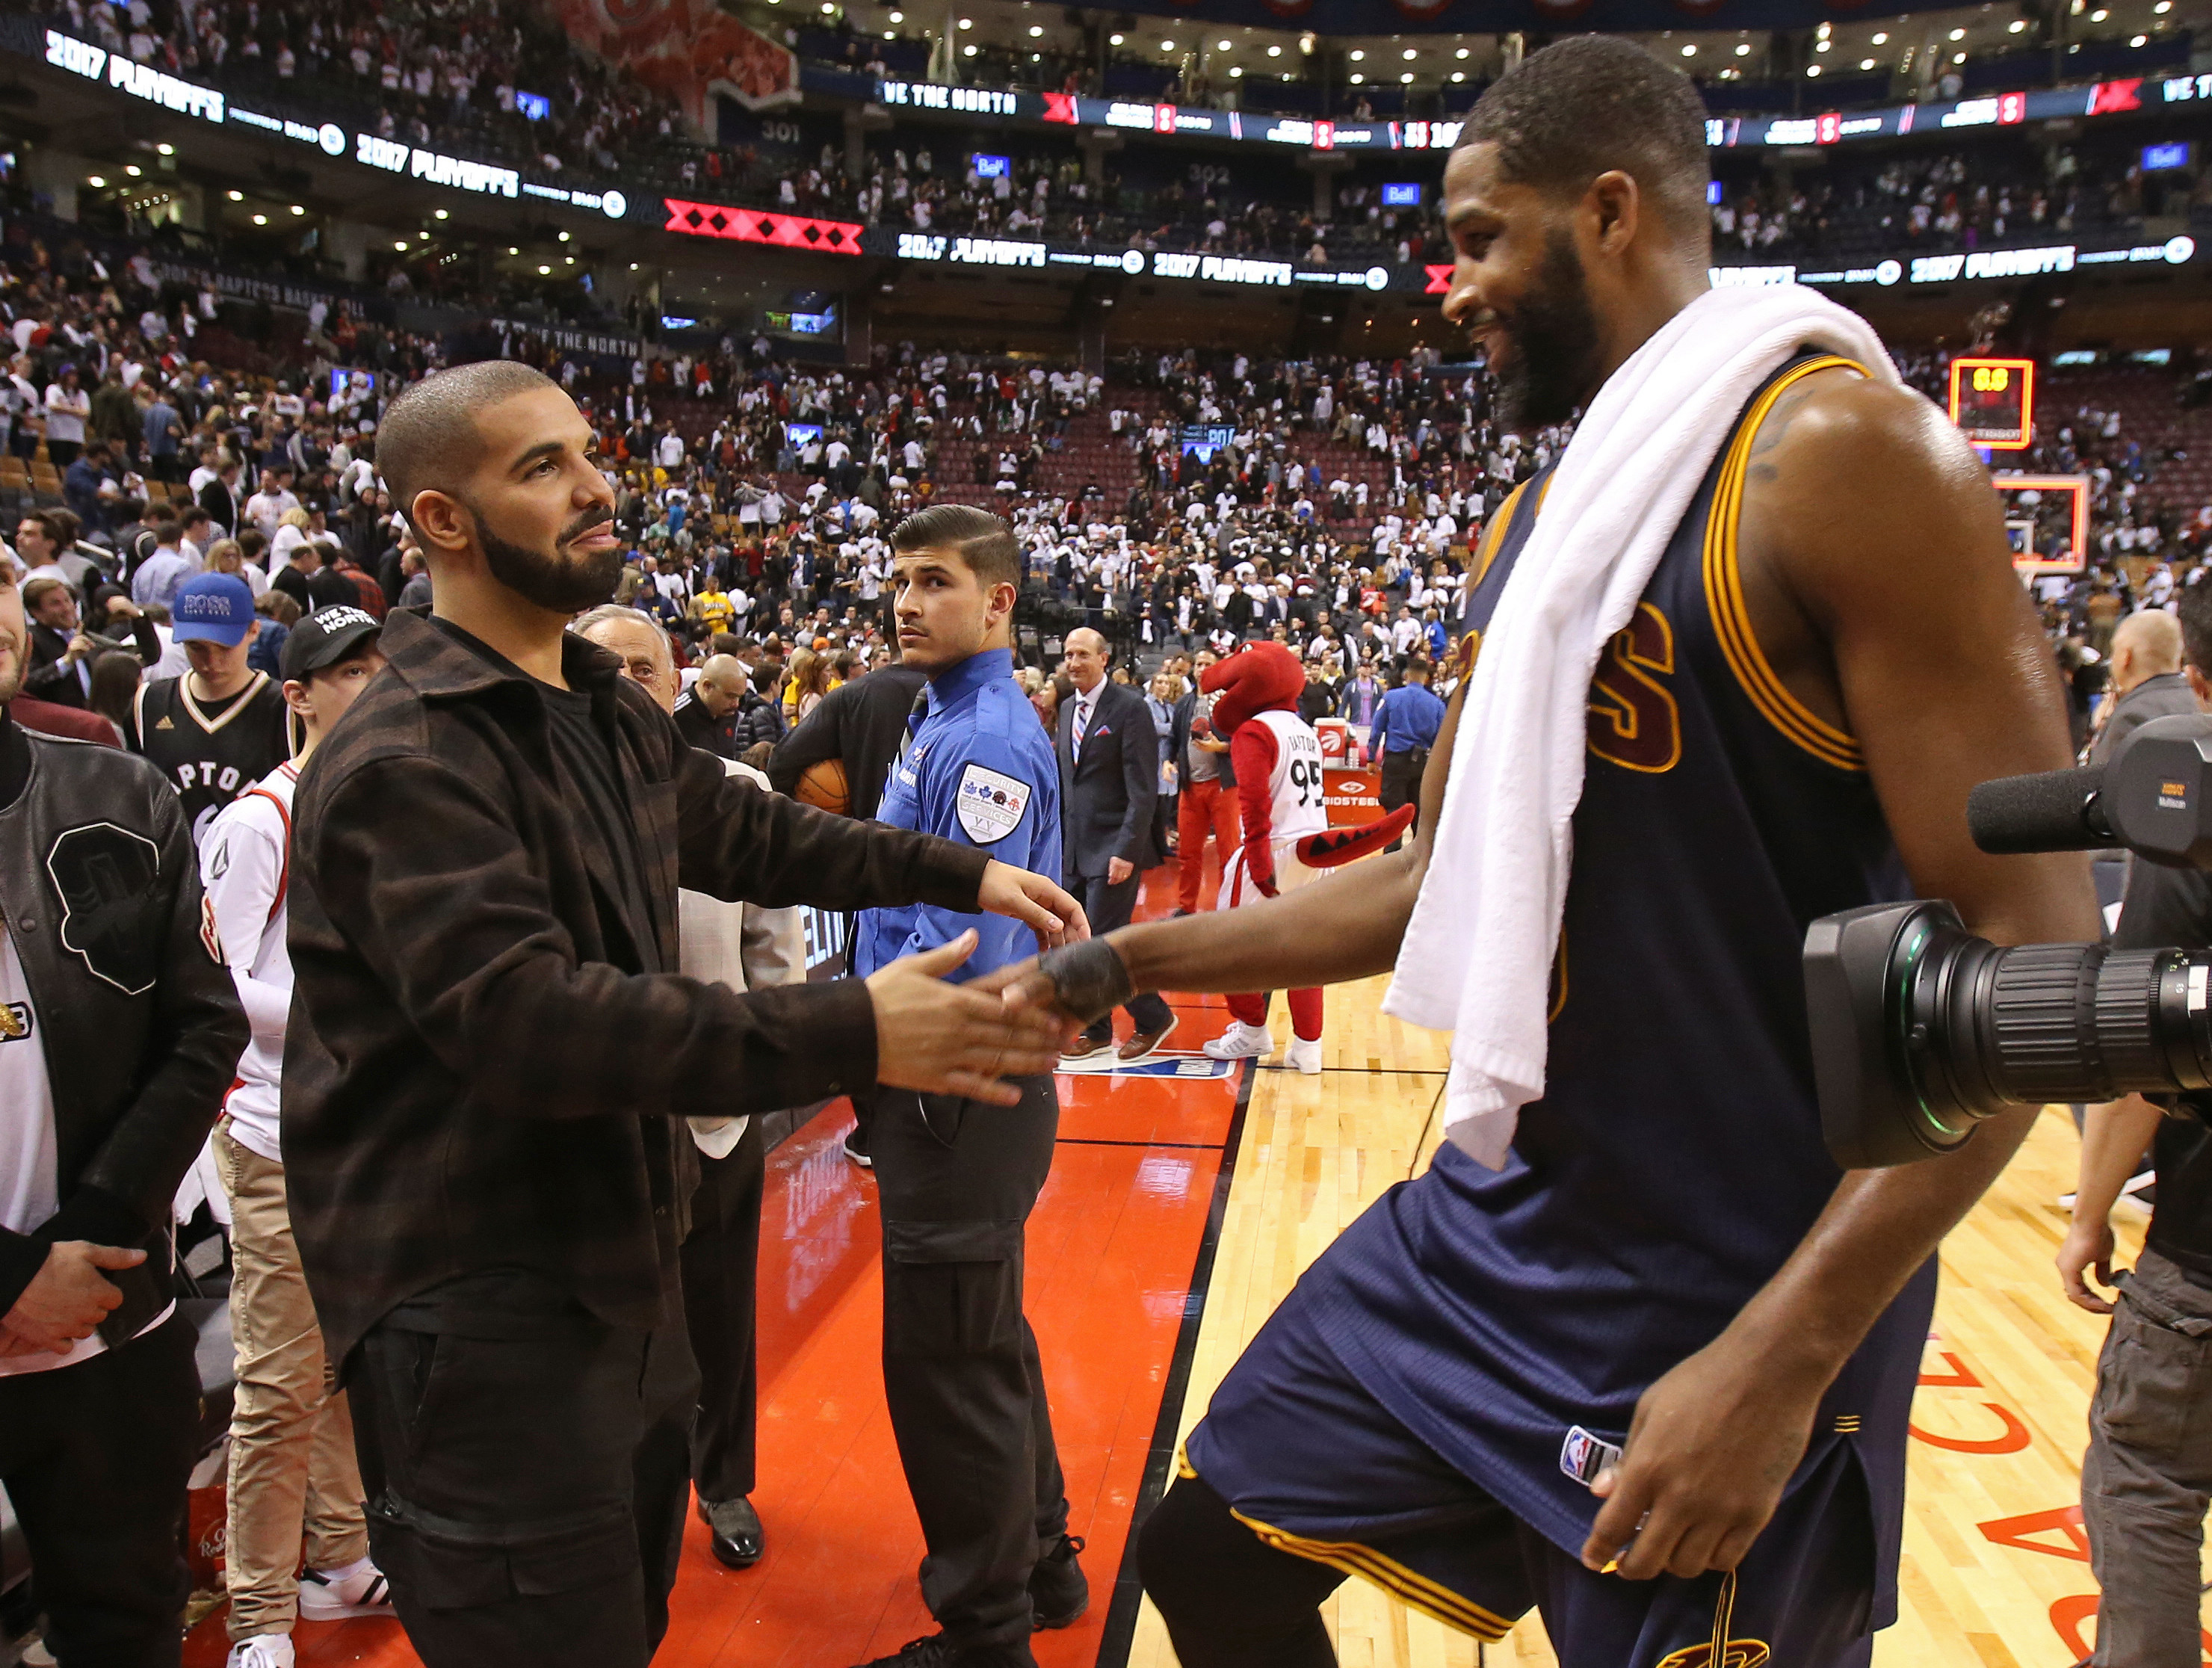 Drake shaking hands with Tristan Thompson